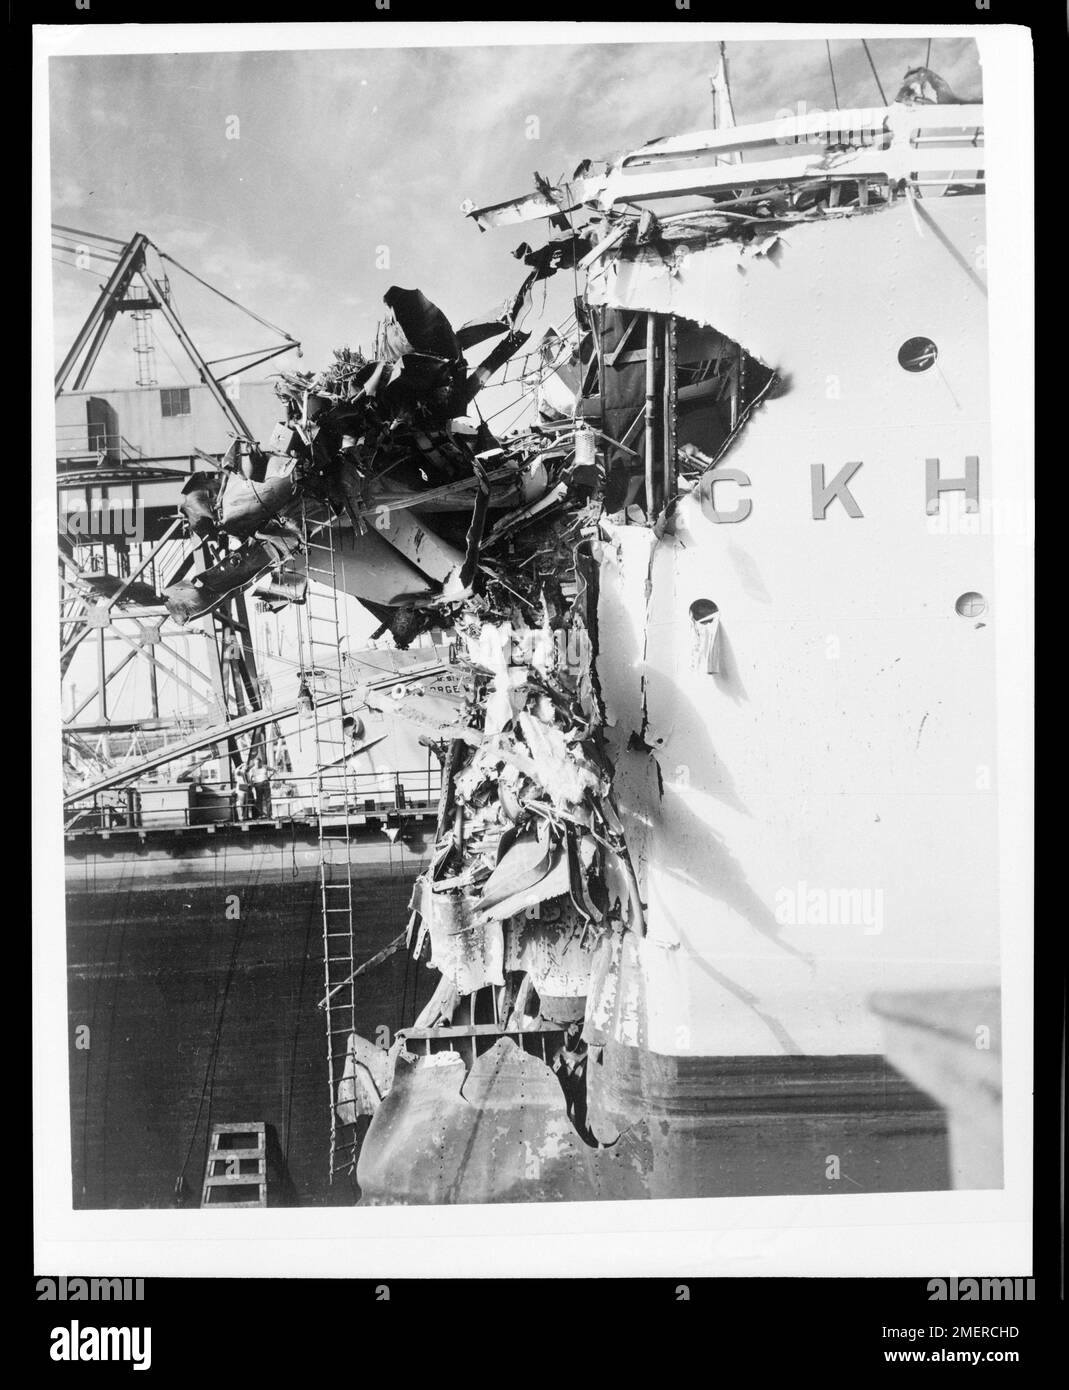 SS Stockholm in Drydock at Pier 97, New York, After Collision with Andrea Doria. [One of nine] 9 pics copied for Merchant Marine Technical borrowed by MMT from files of Merchant Marine Fisheries Committee (Photos taken by A. Miller of Bethlehem Steel Corp.). Stock Photo